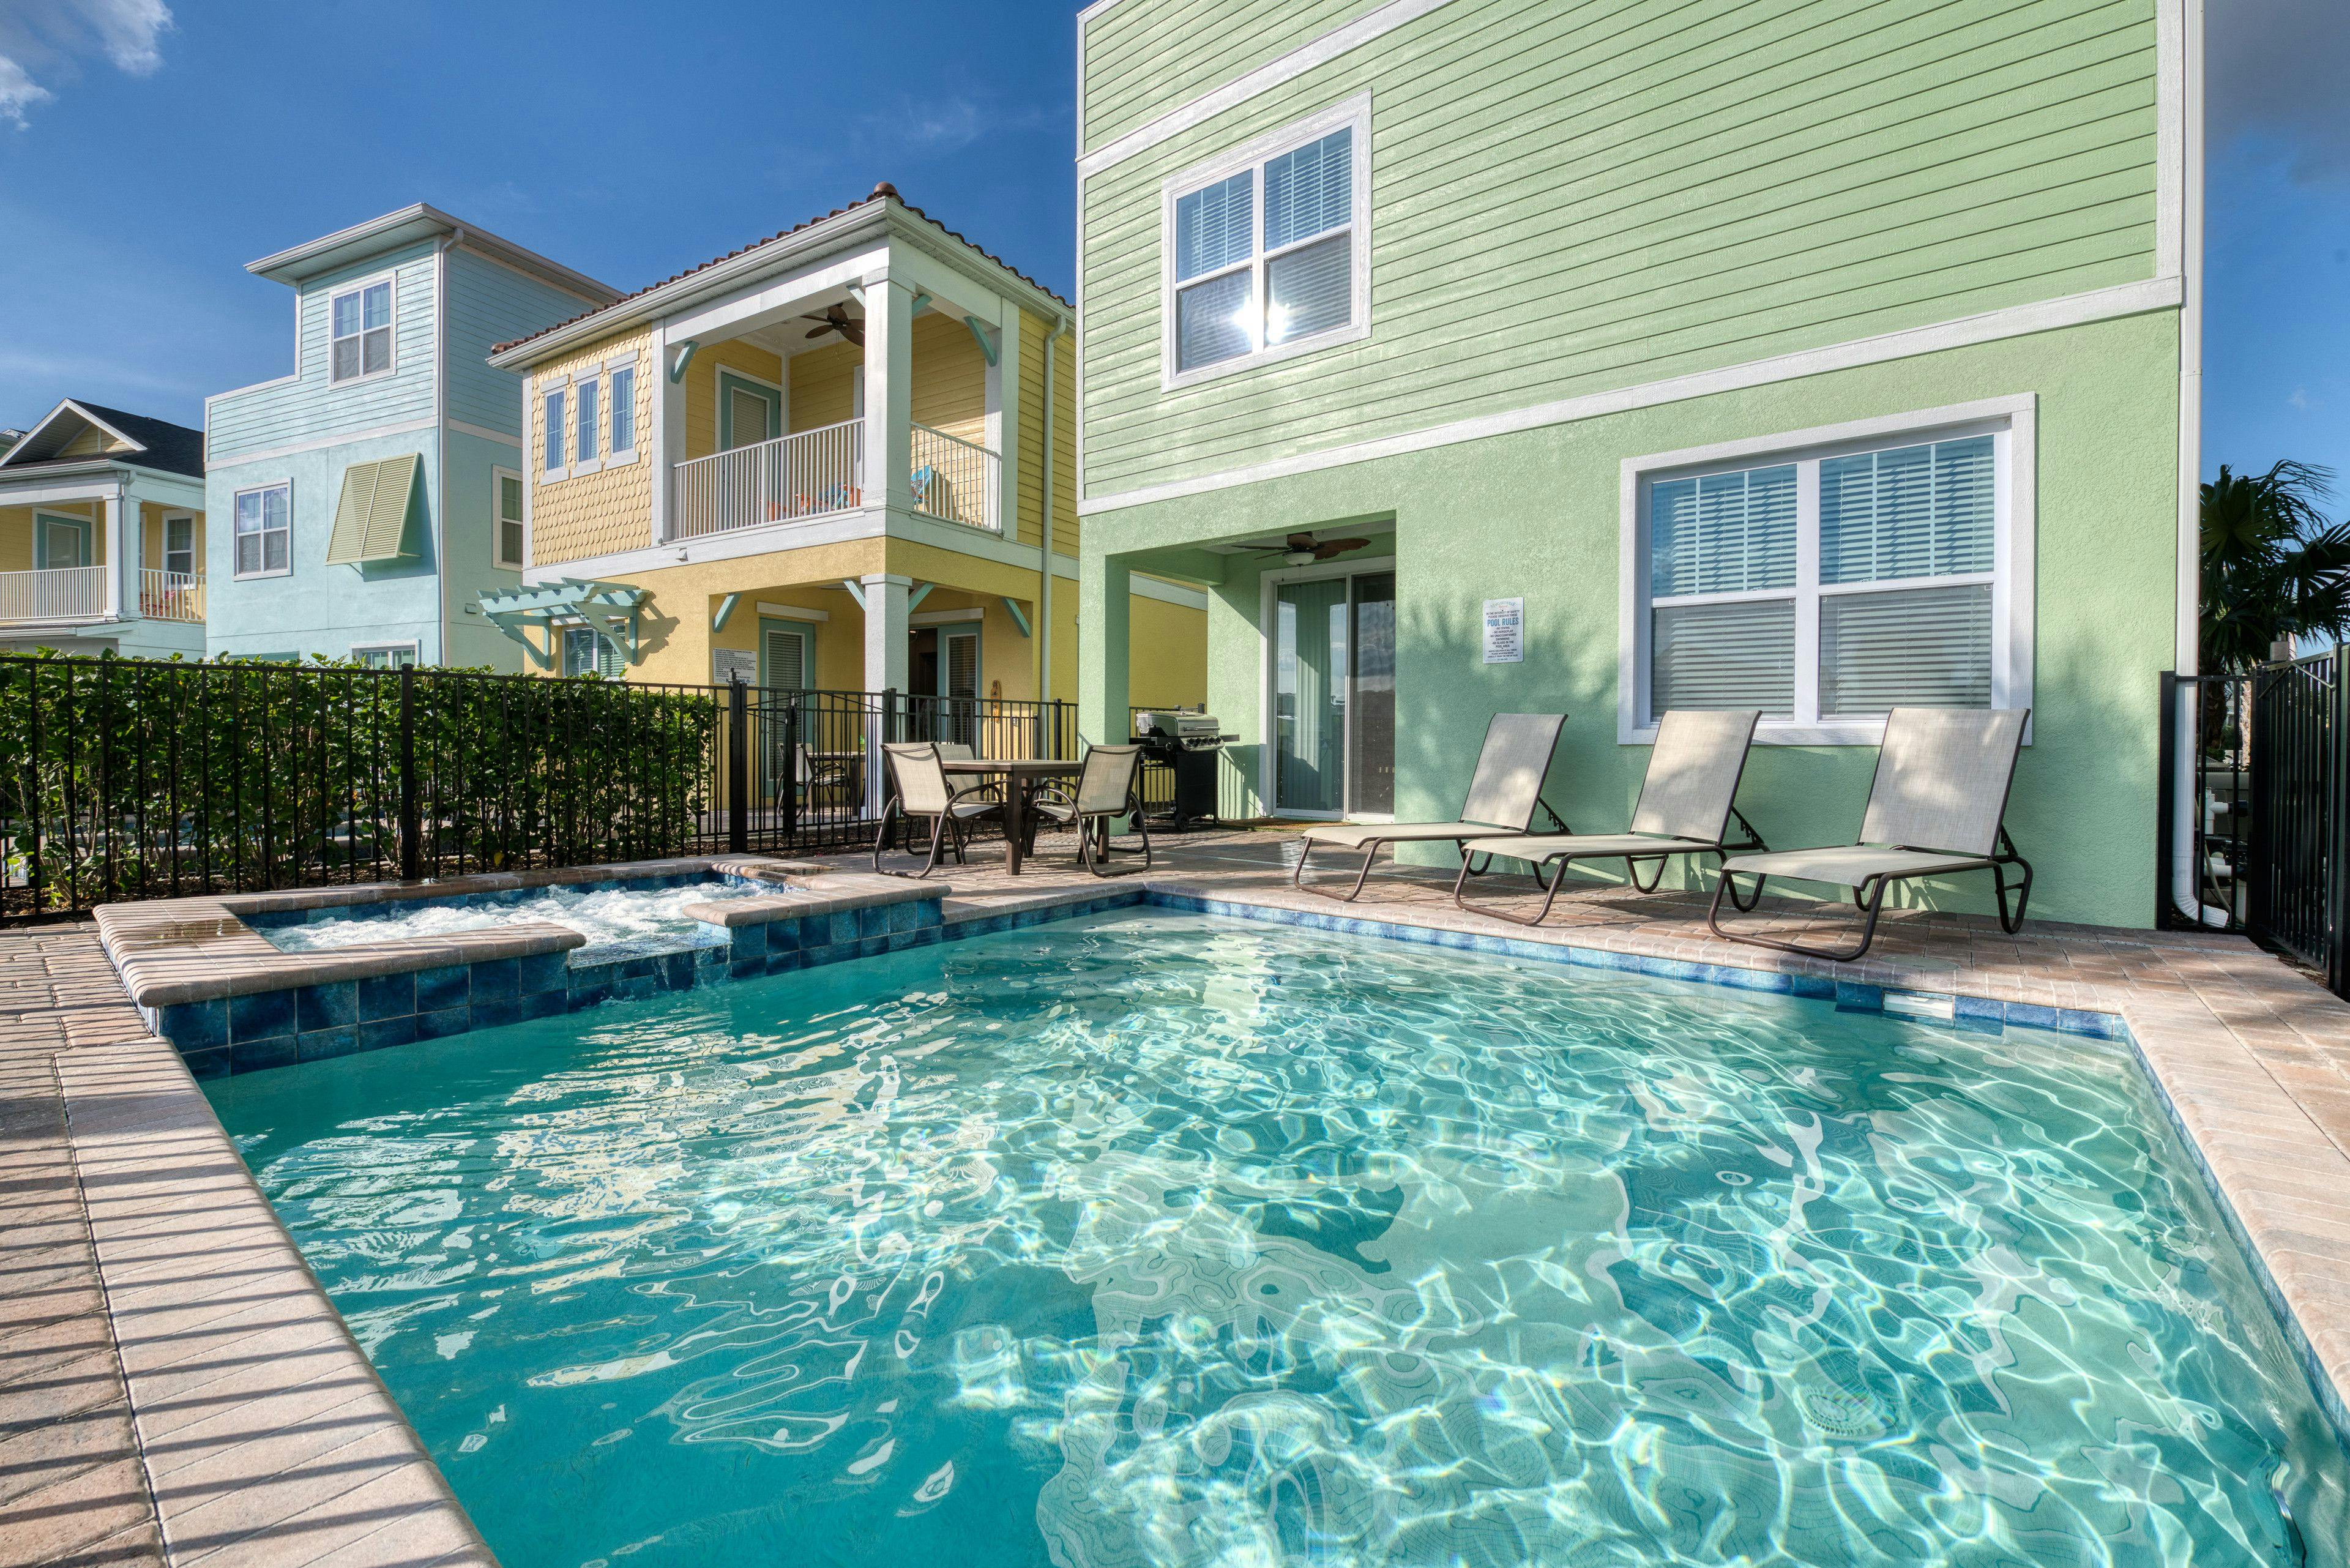 Margaritaville Orlando cottages with pools - Margaritaville 19 green-colored vacation rental with private pool in the back yard